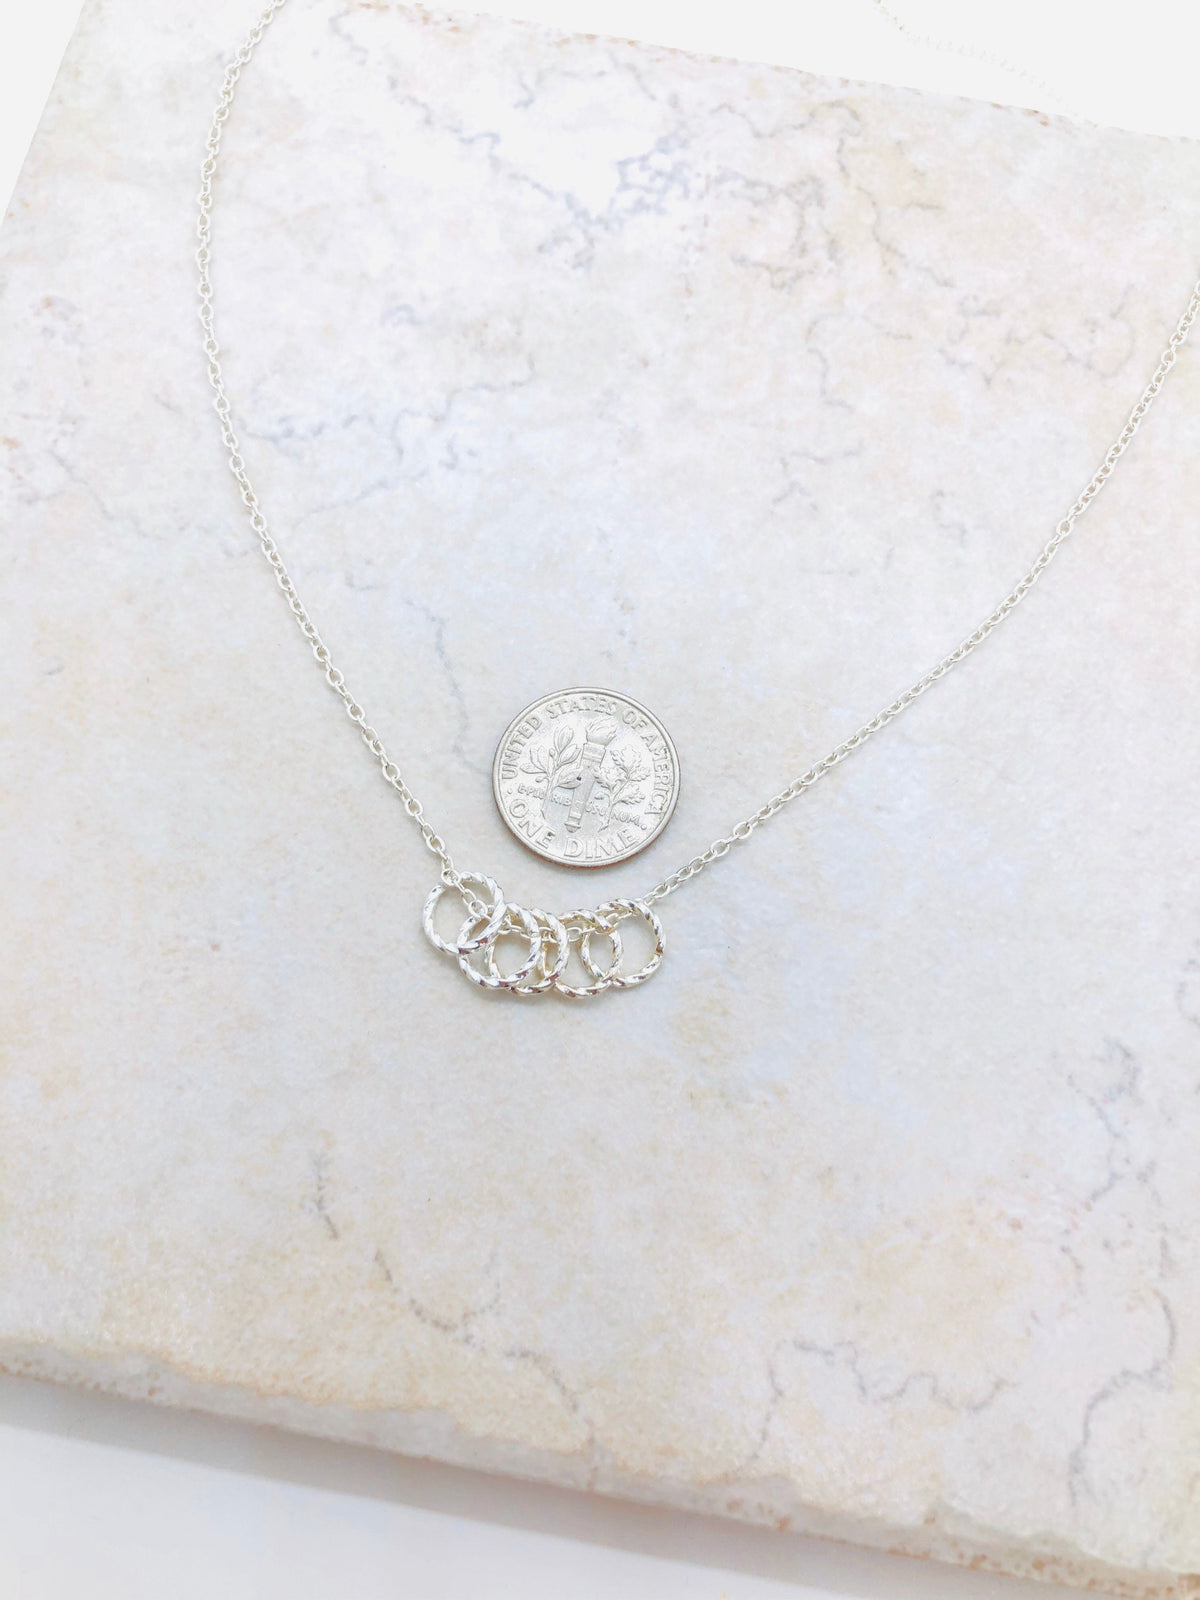 Mother's Necklace With Kids' Names & Birthstones - 2-5 Rings | Centime Gift